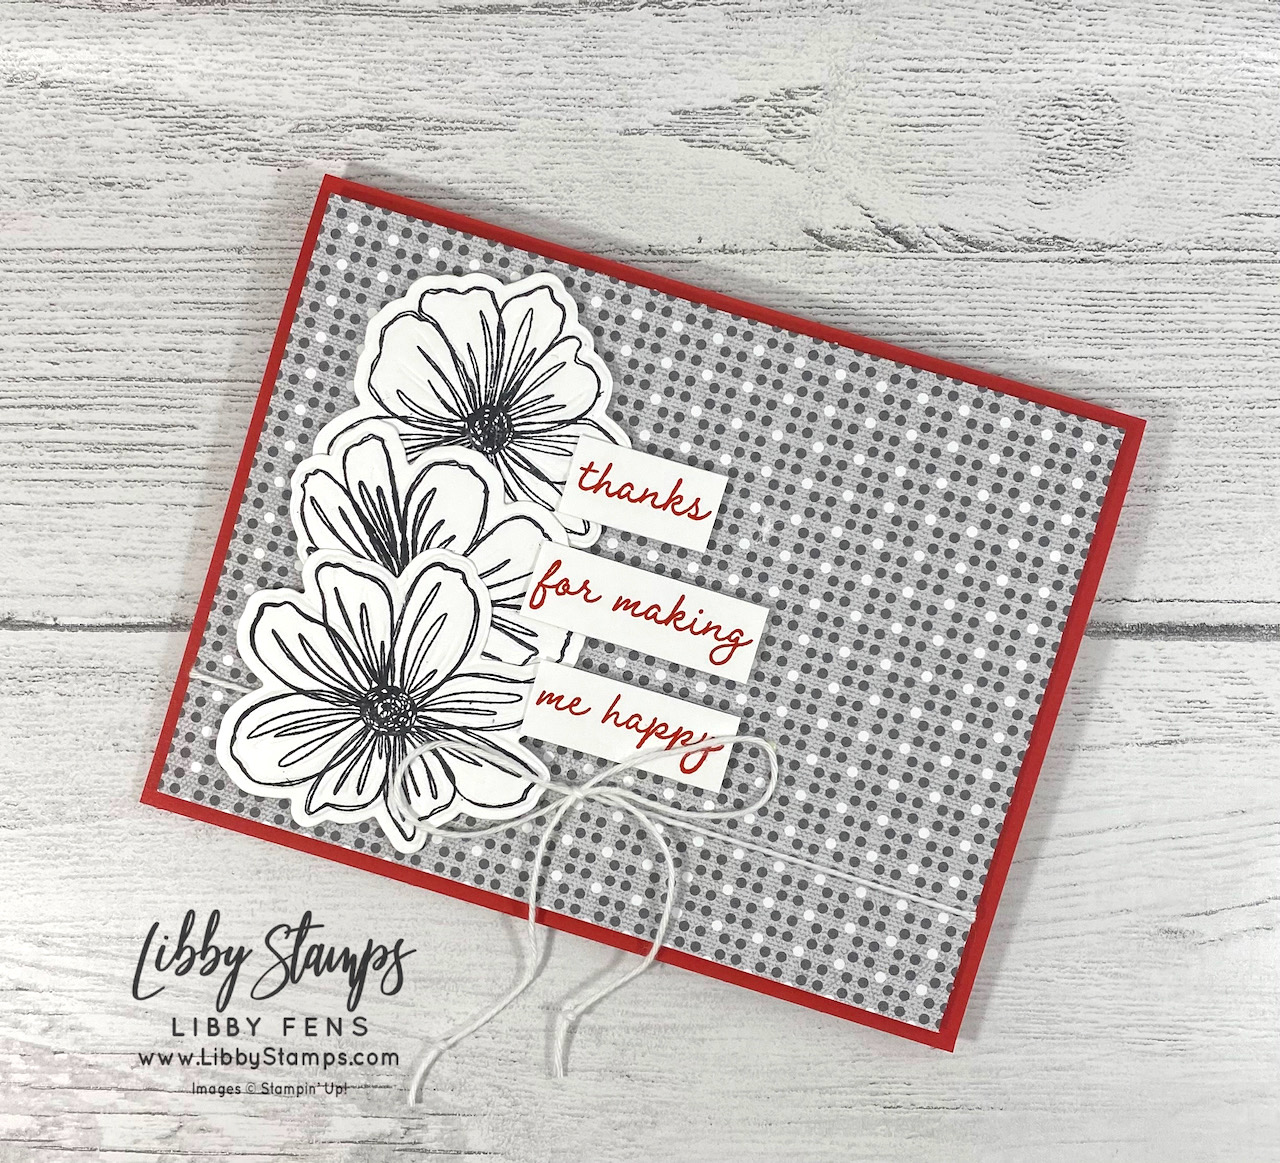 libbystamps, Stampin' Up, Art in Bloom, Art In Bloom Bundle, Bloom Hybrid Embossing Folder, Well Suited DSP, Snail Mail Twine Combo Pack, Creative Stampers, Creative Stampers Tutorial Bundle Group